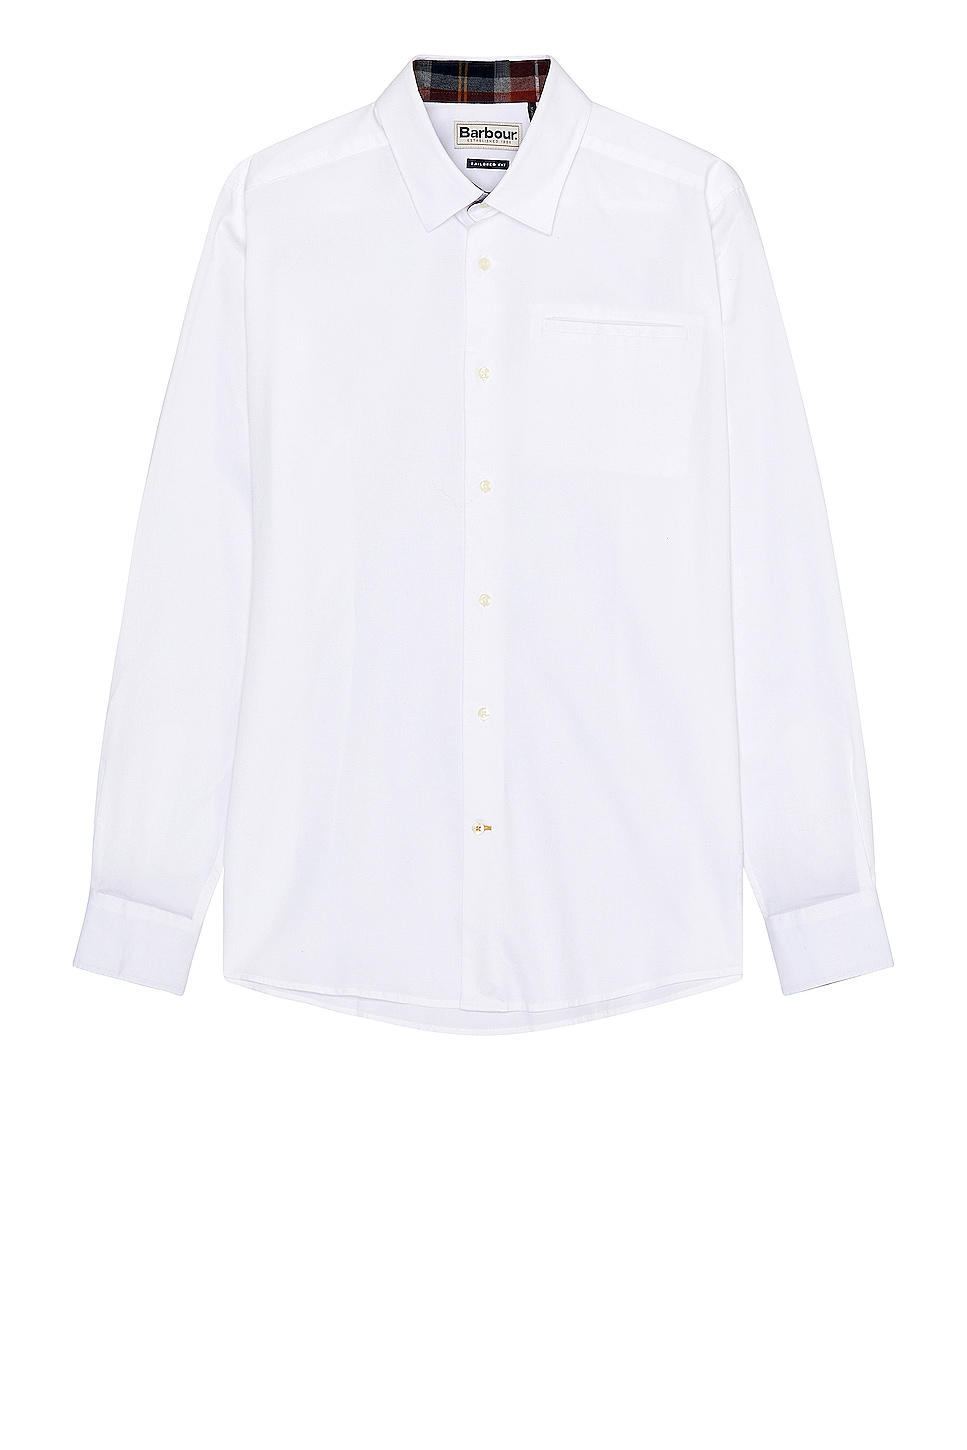 Image 1 of Barbour Lyle Tailored Shirt in White